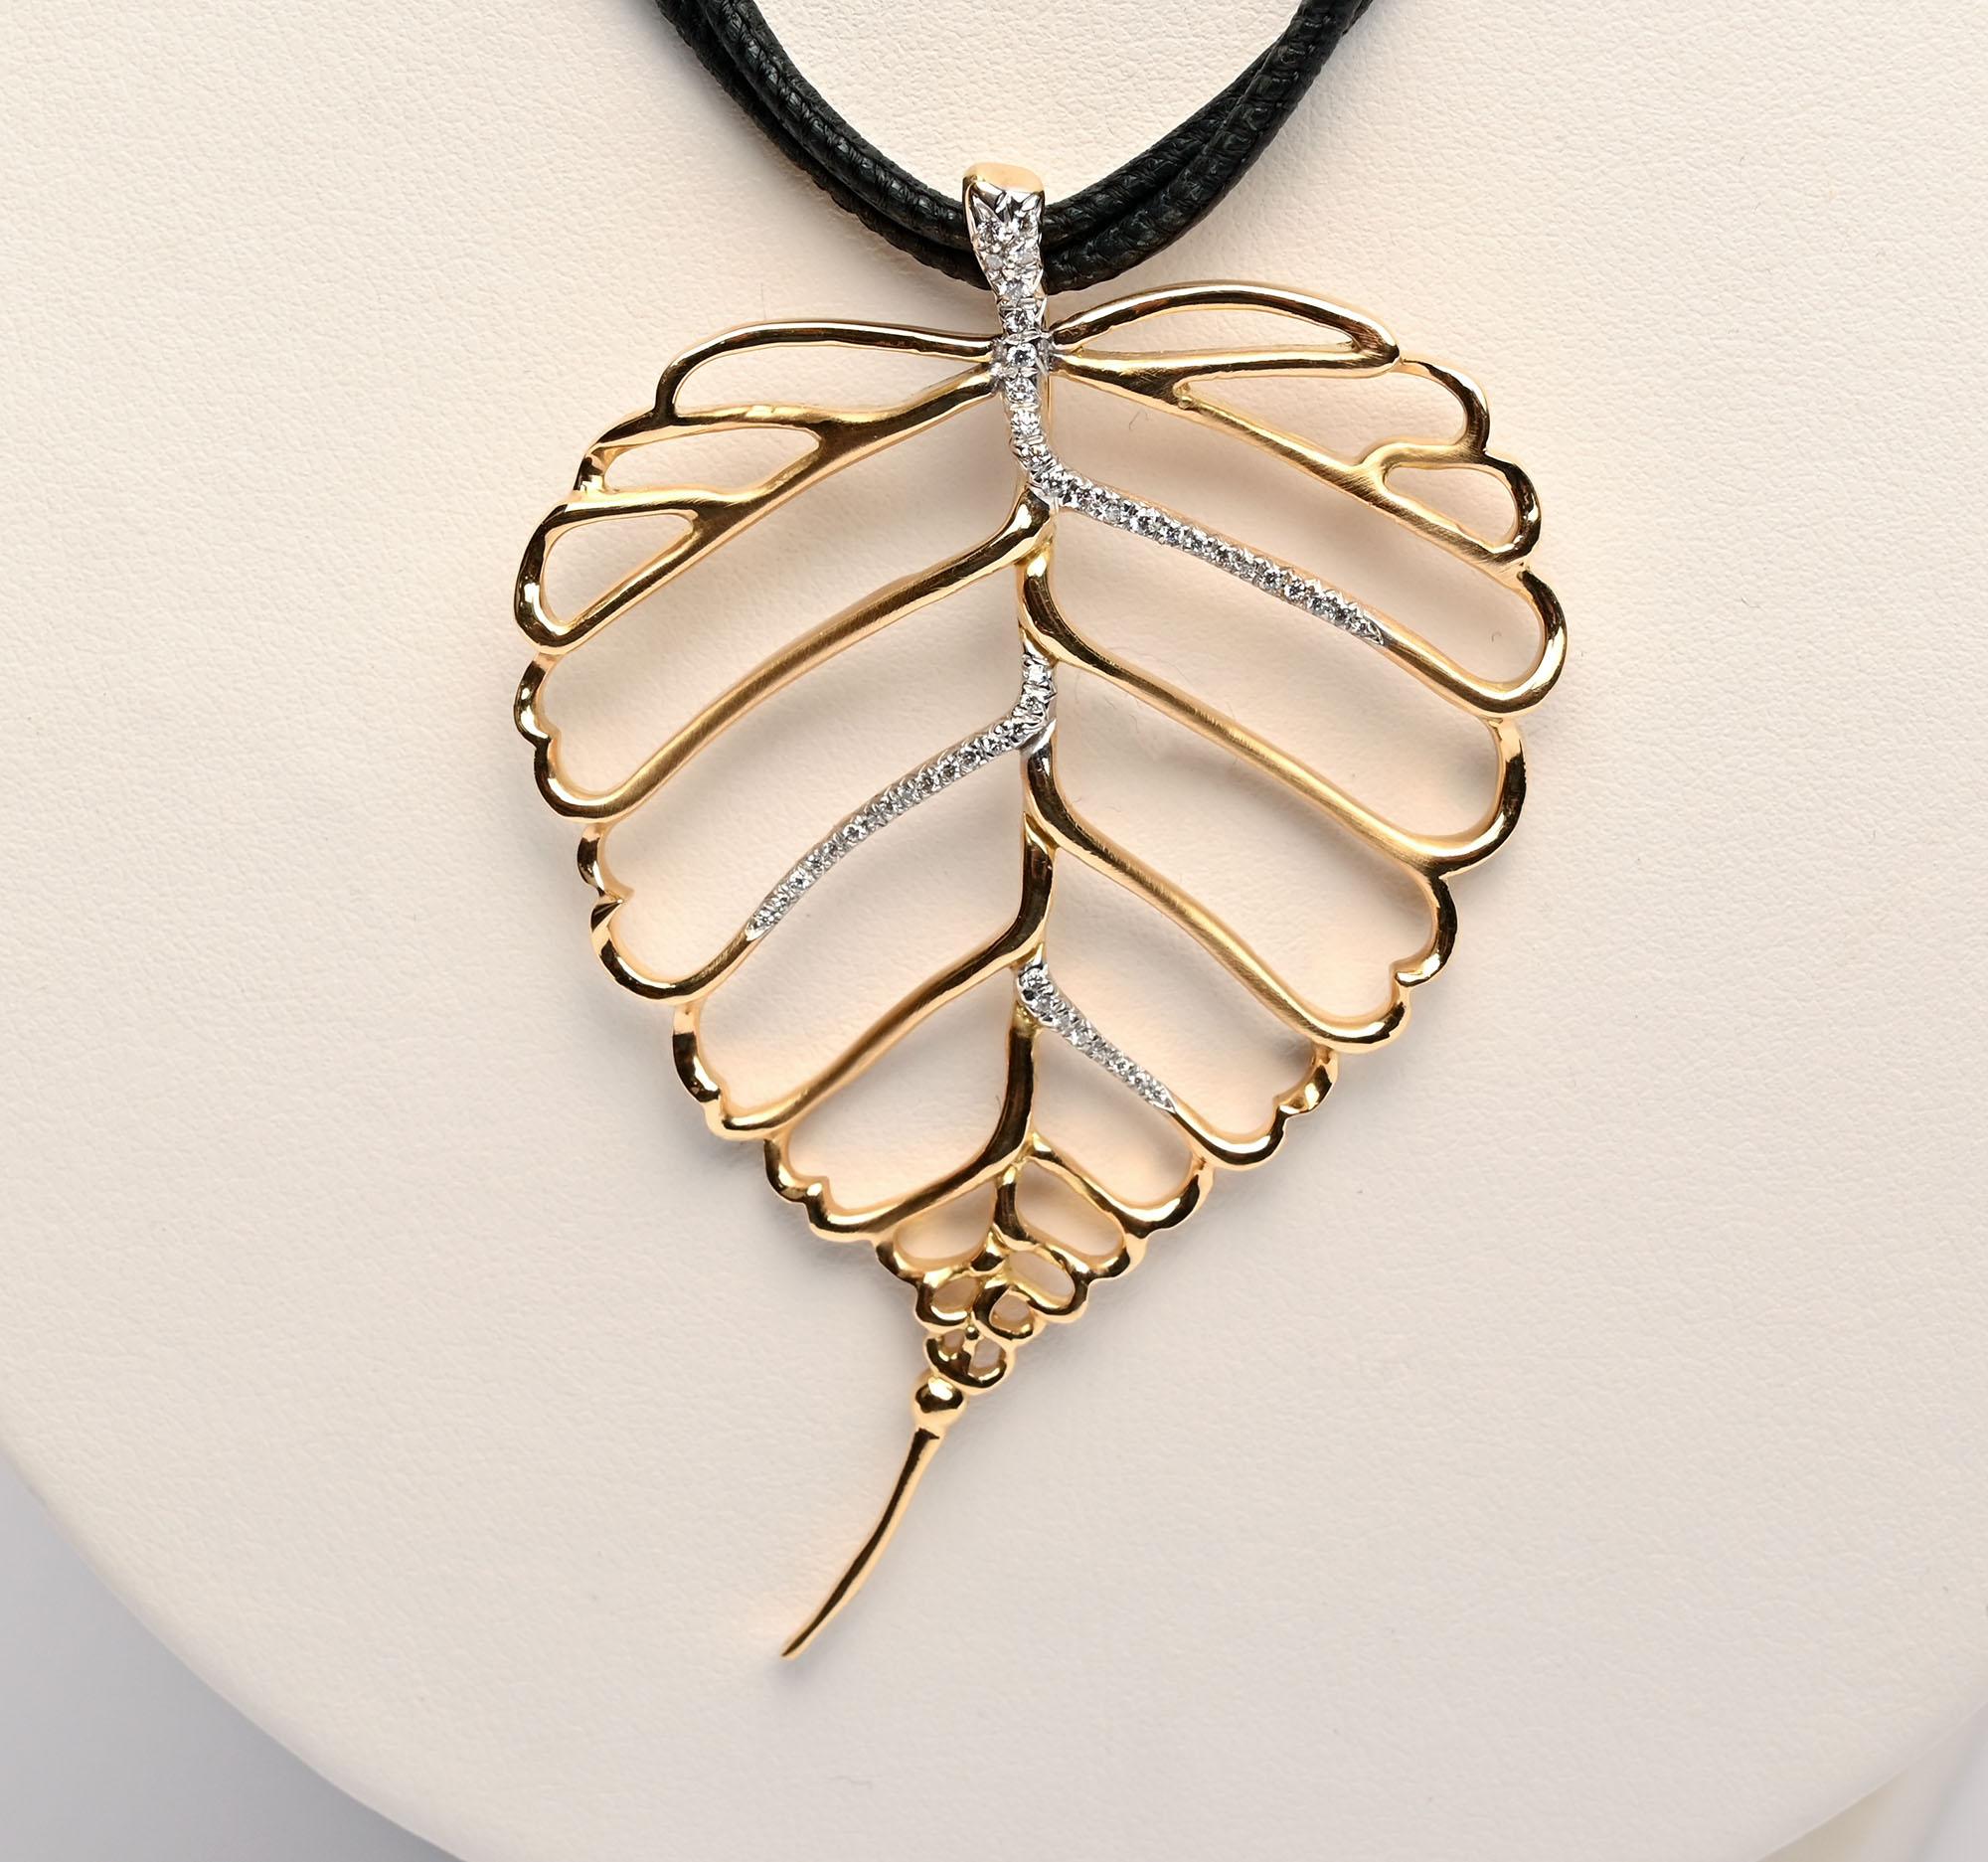 Streamlind pendant necklace of 18 karat gold with diamonds along the veins and stem of the leaf. Angela Cummings often worked with Salvador Assael. Both of their names are stamped on this piece. The pendant is on a double leather cord that measures